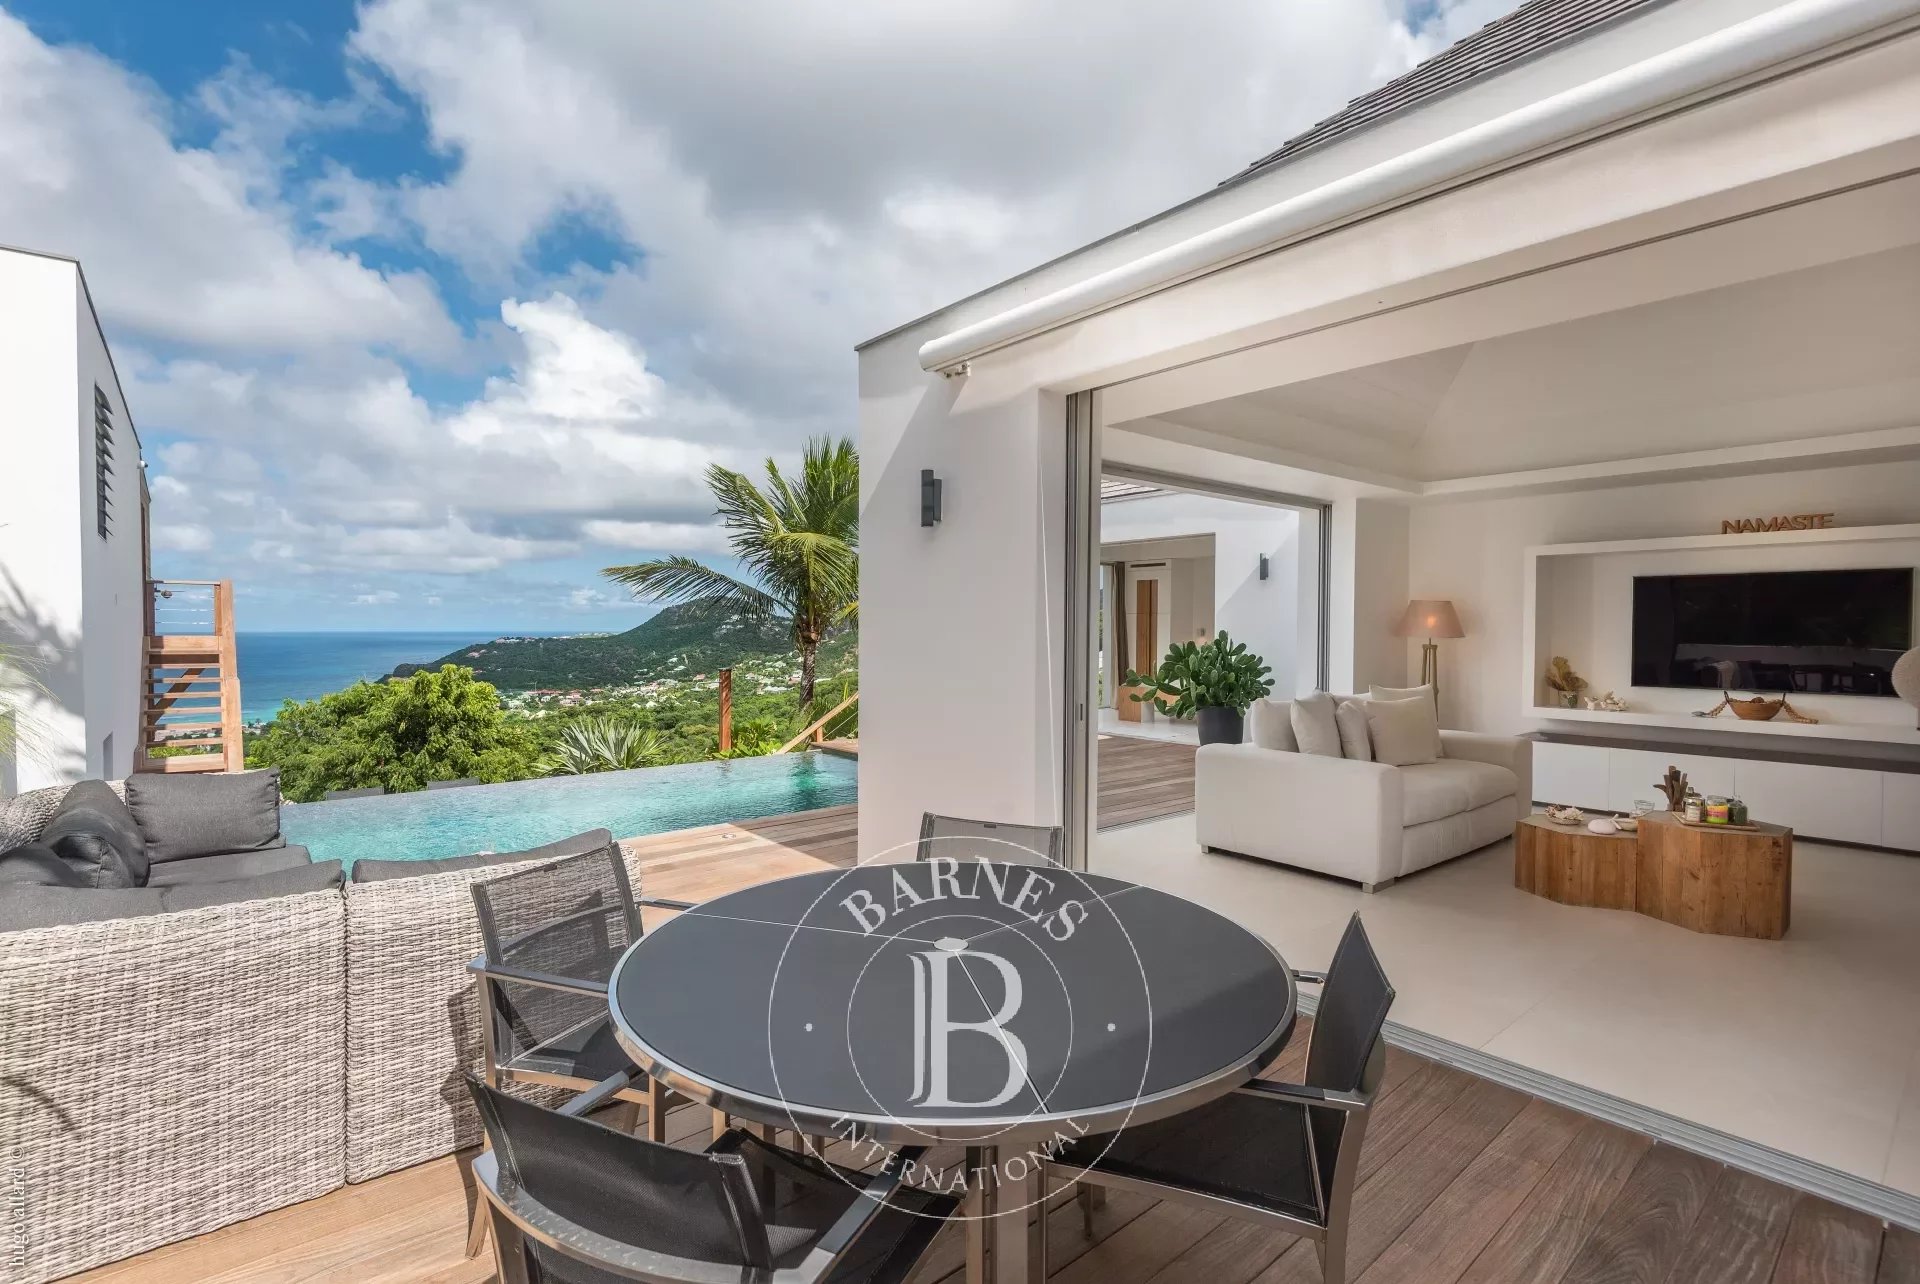 5 -Bedroom Villa in St.Barths - picture 14 title=